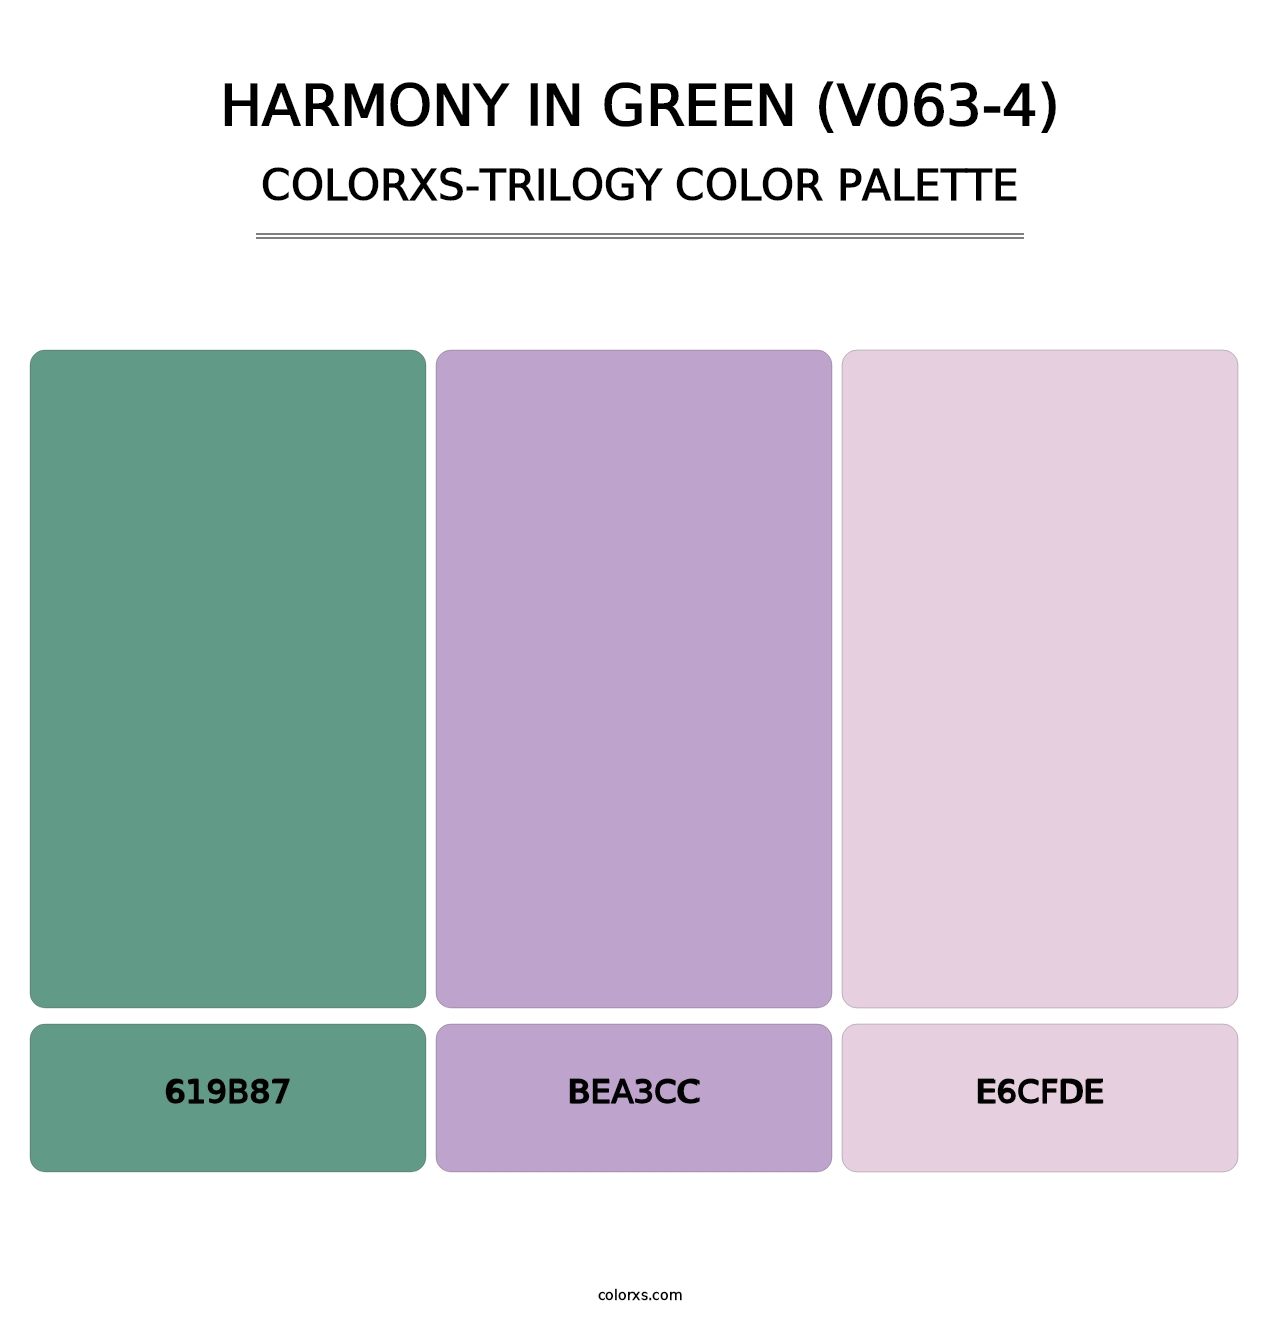 Harmony in Green (V063-4) - Colorxs Trilogy Palette